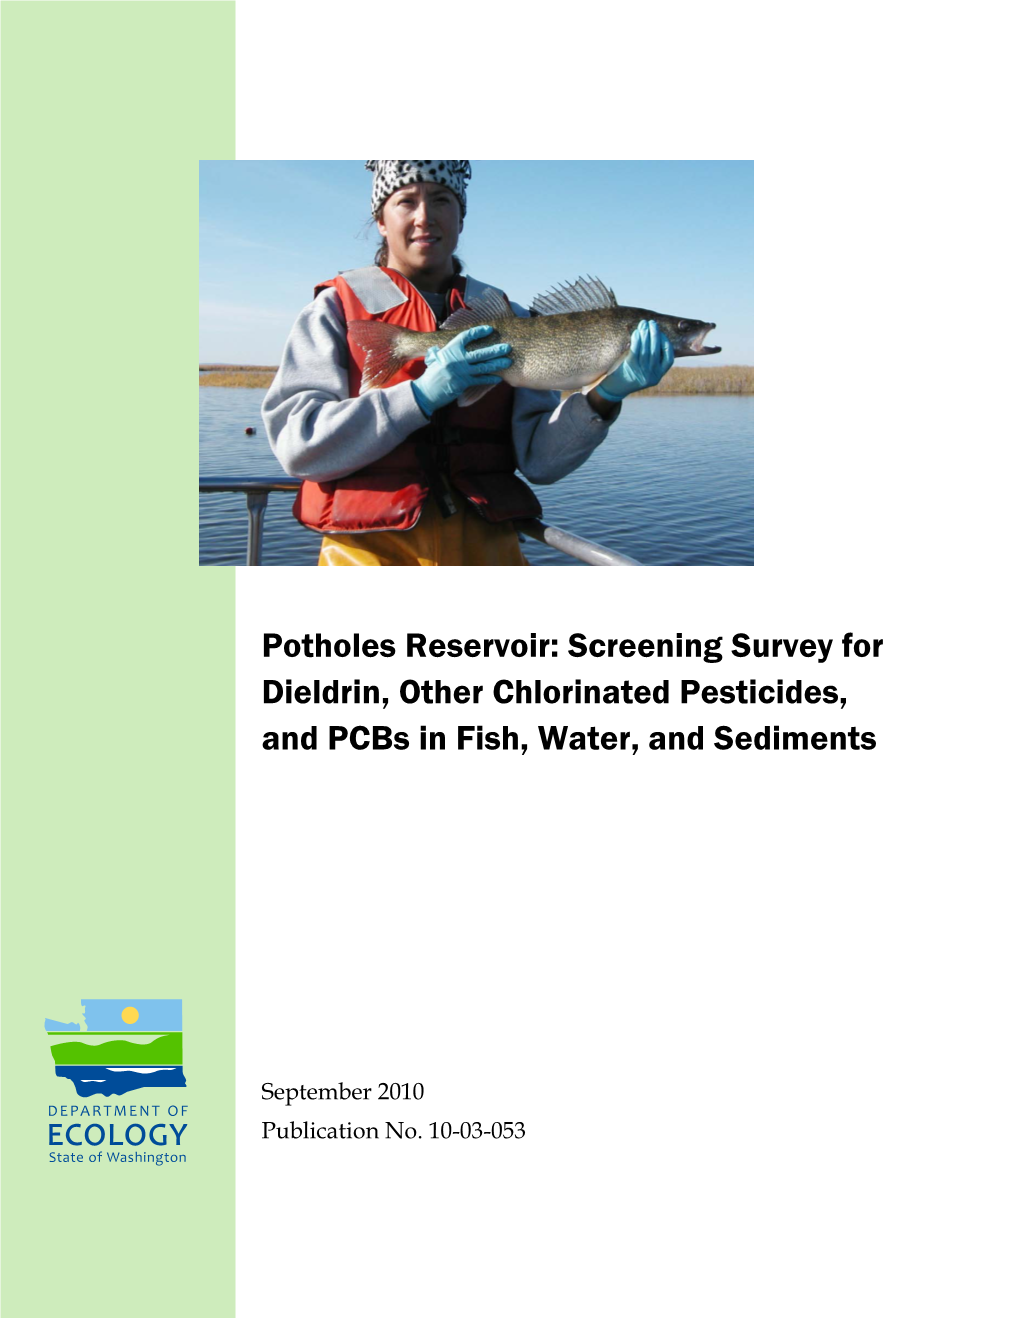 Potholes Reservoir: Screening Survey for Dieldrin, Other Chlorinated Pesticides, and Pcbs in Fish, Water, and Sediments